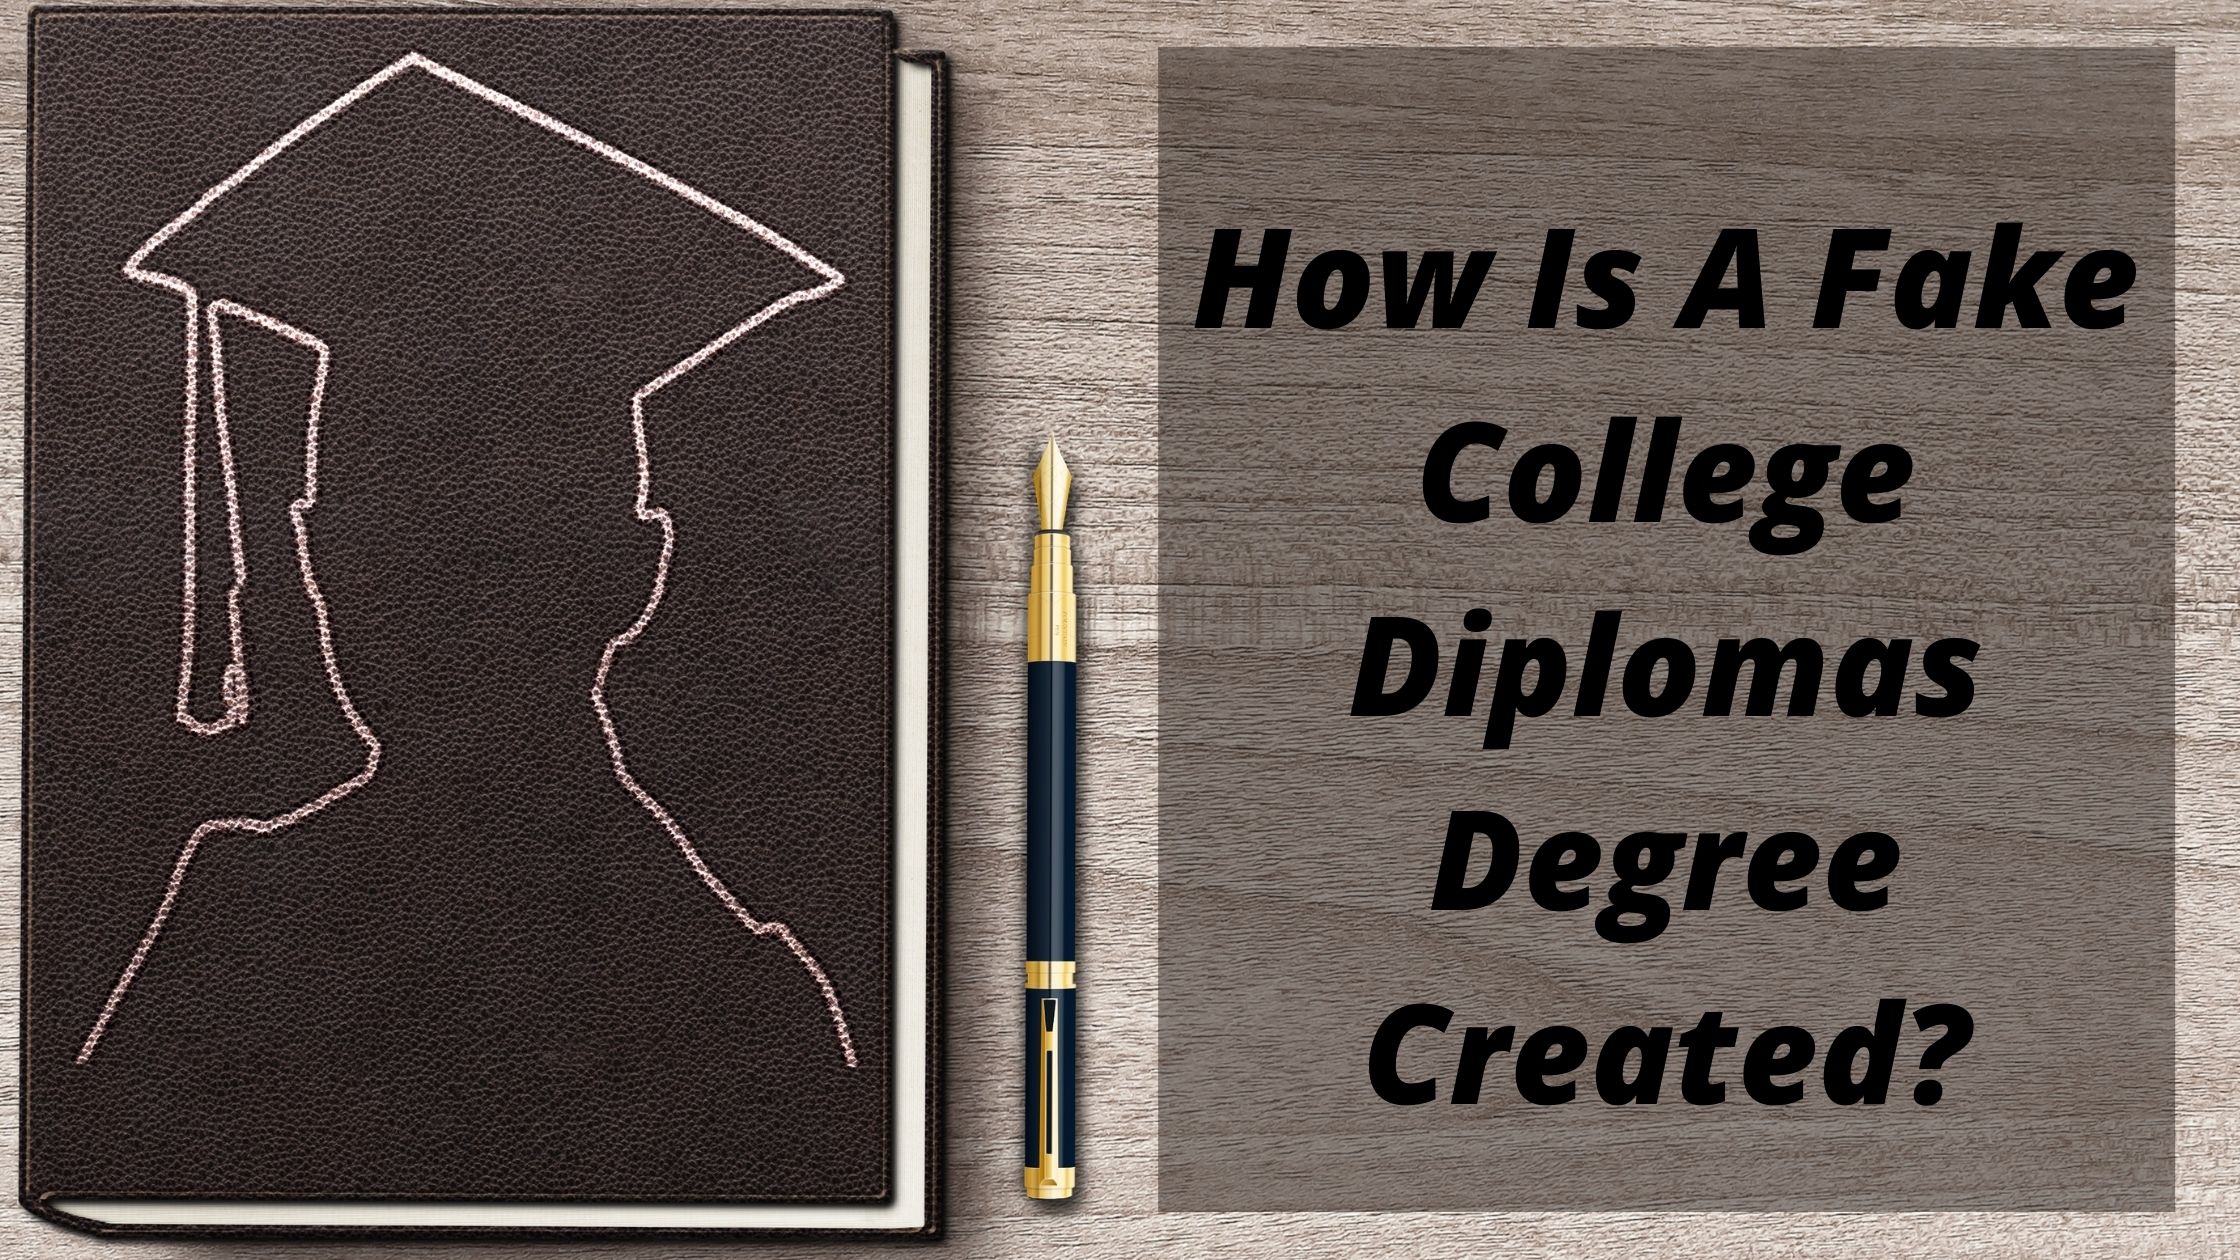 How Is A Fake College Diplomas Degree Created?